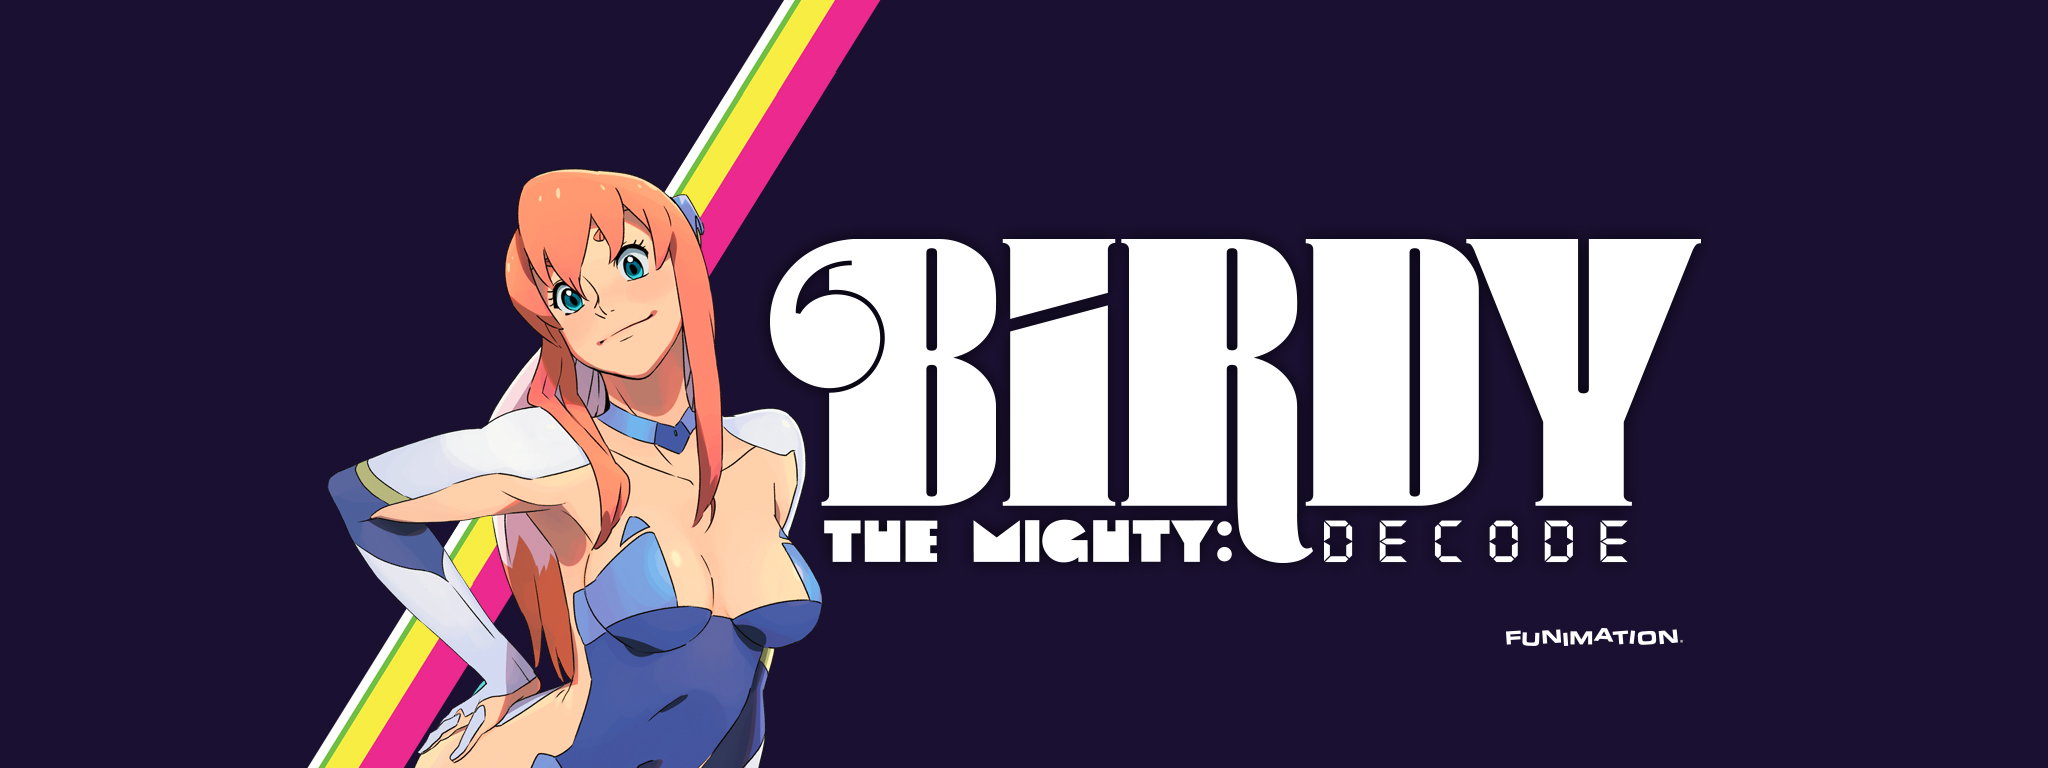 Nice Images Collection: Birdy The Mighty: Decode Desktop Wallpapers